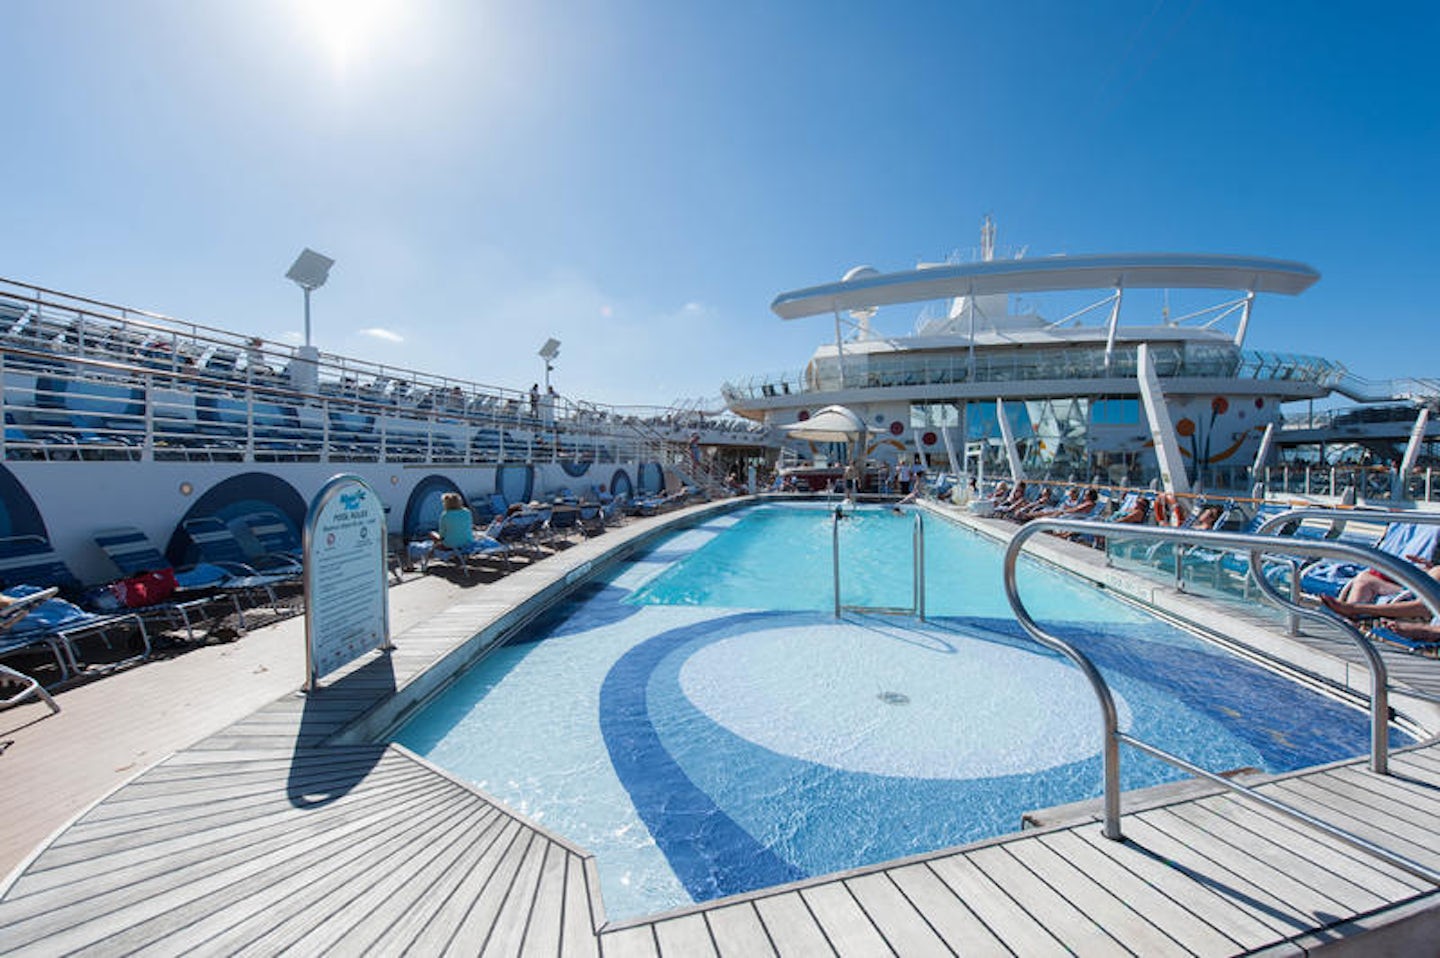 The Main Pool on Allure of the Seas